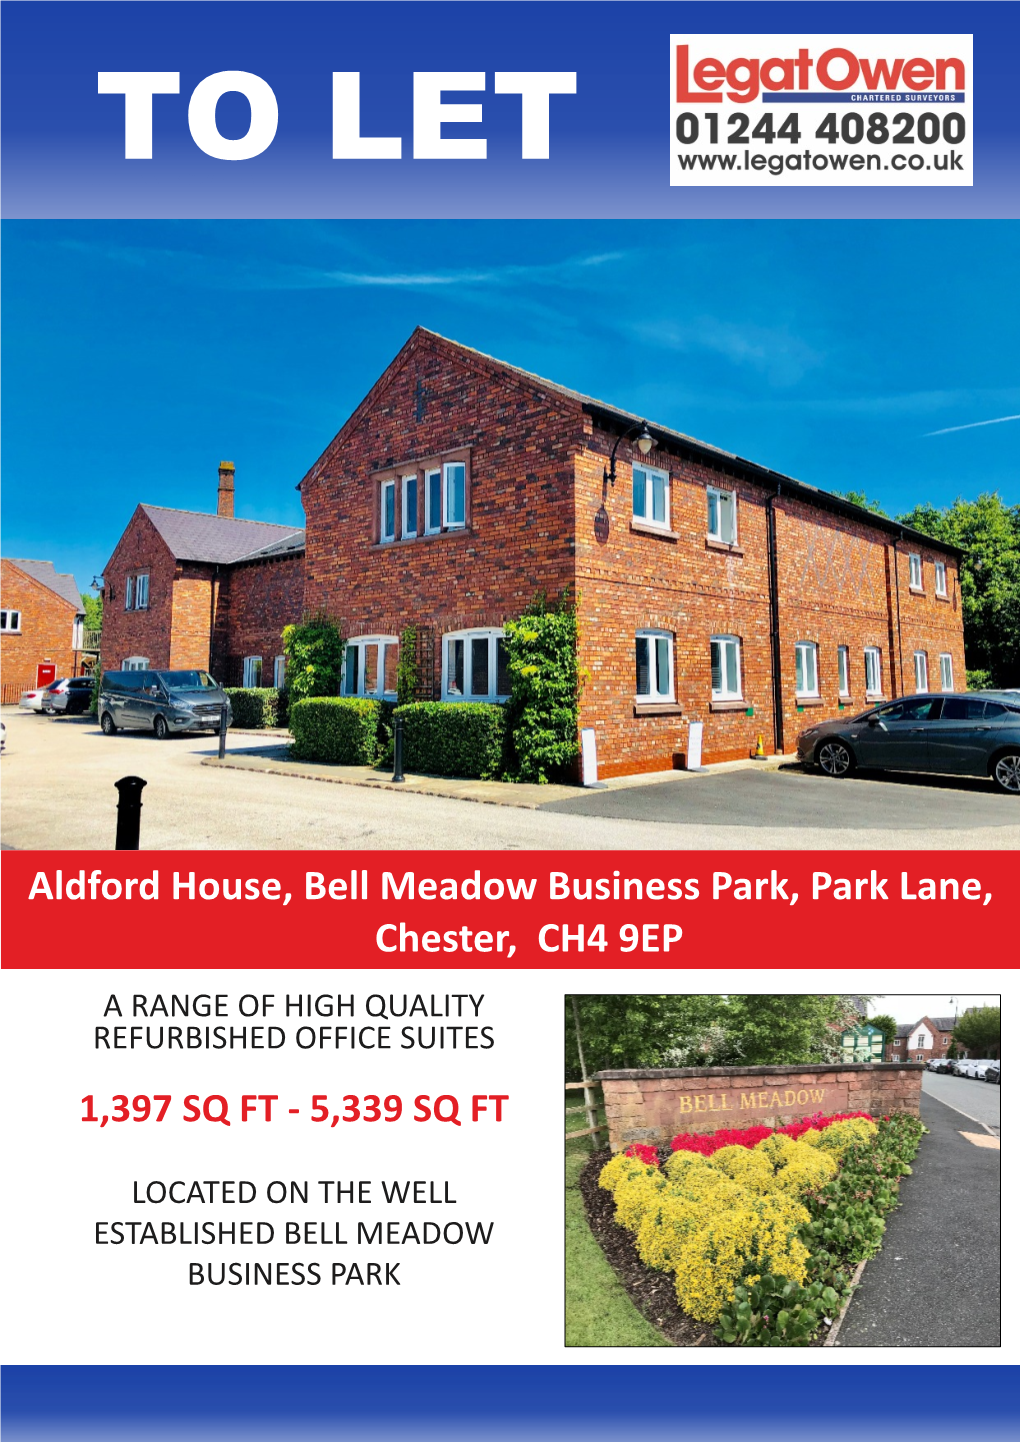 Chester,CHANGE) CH4 9EP a RANGE of HIGH QUALITY REFURBISHED OFFICE SUITES 1,397 SQ FT - 5,339 SQ FT